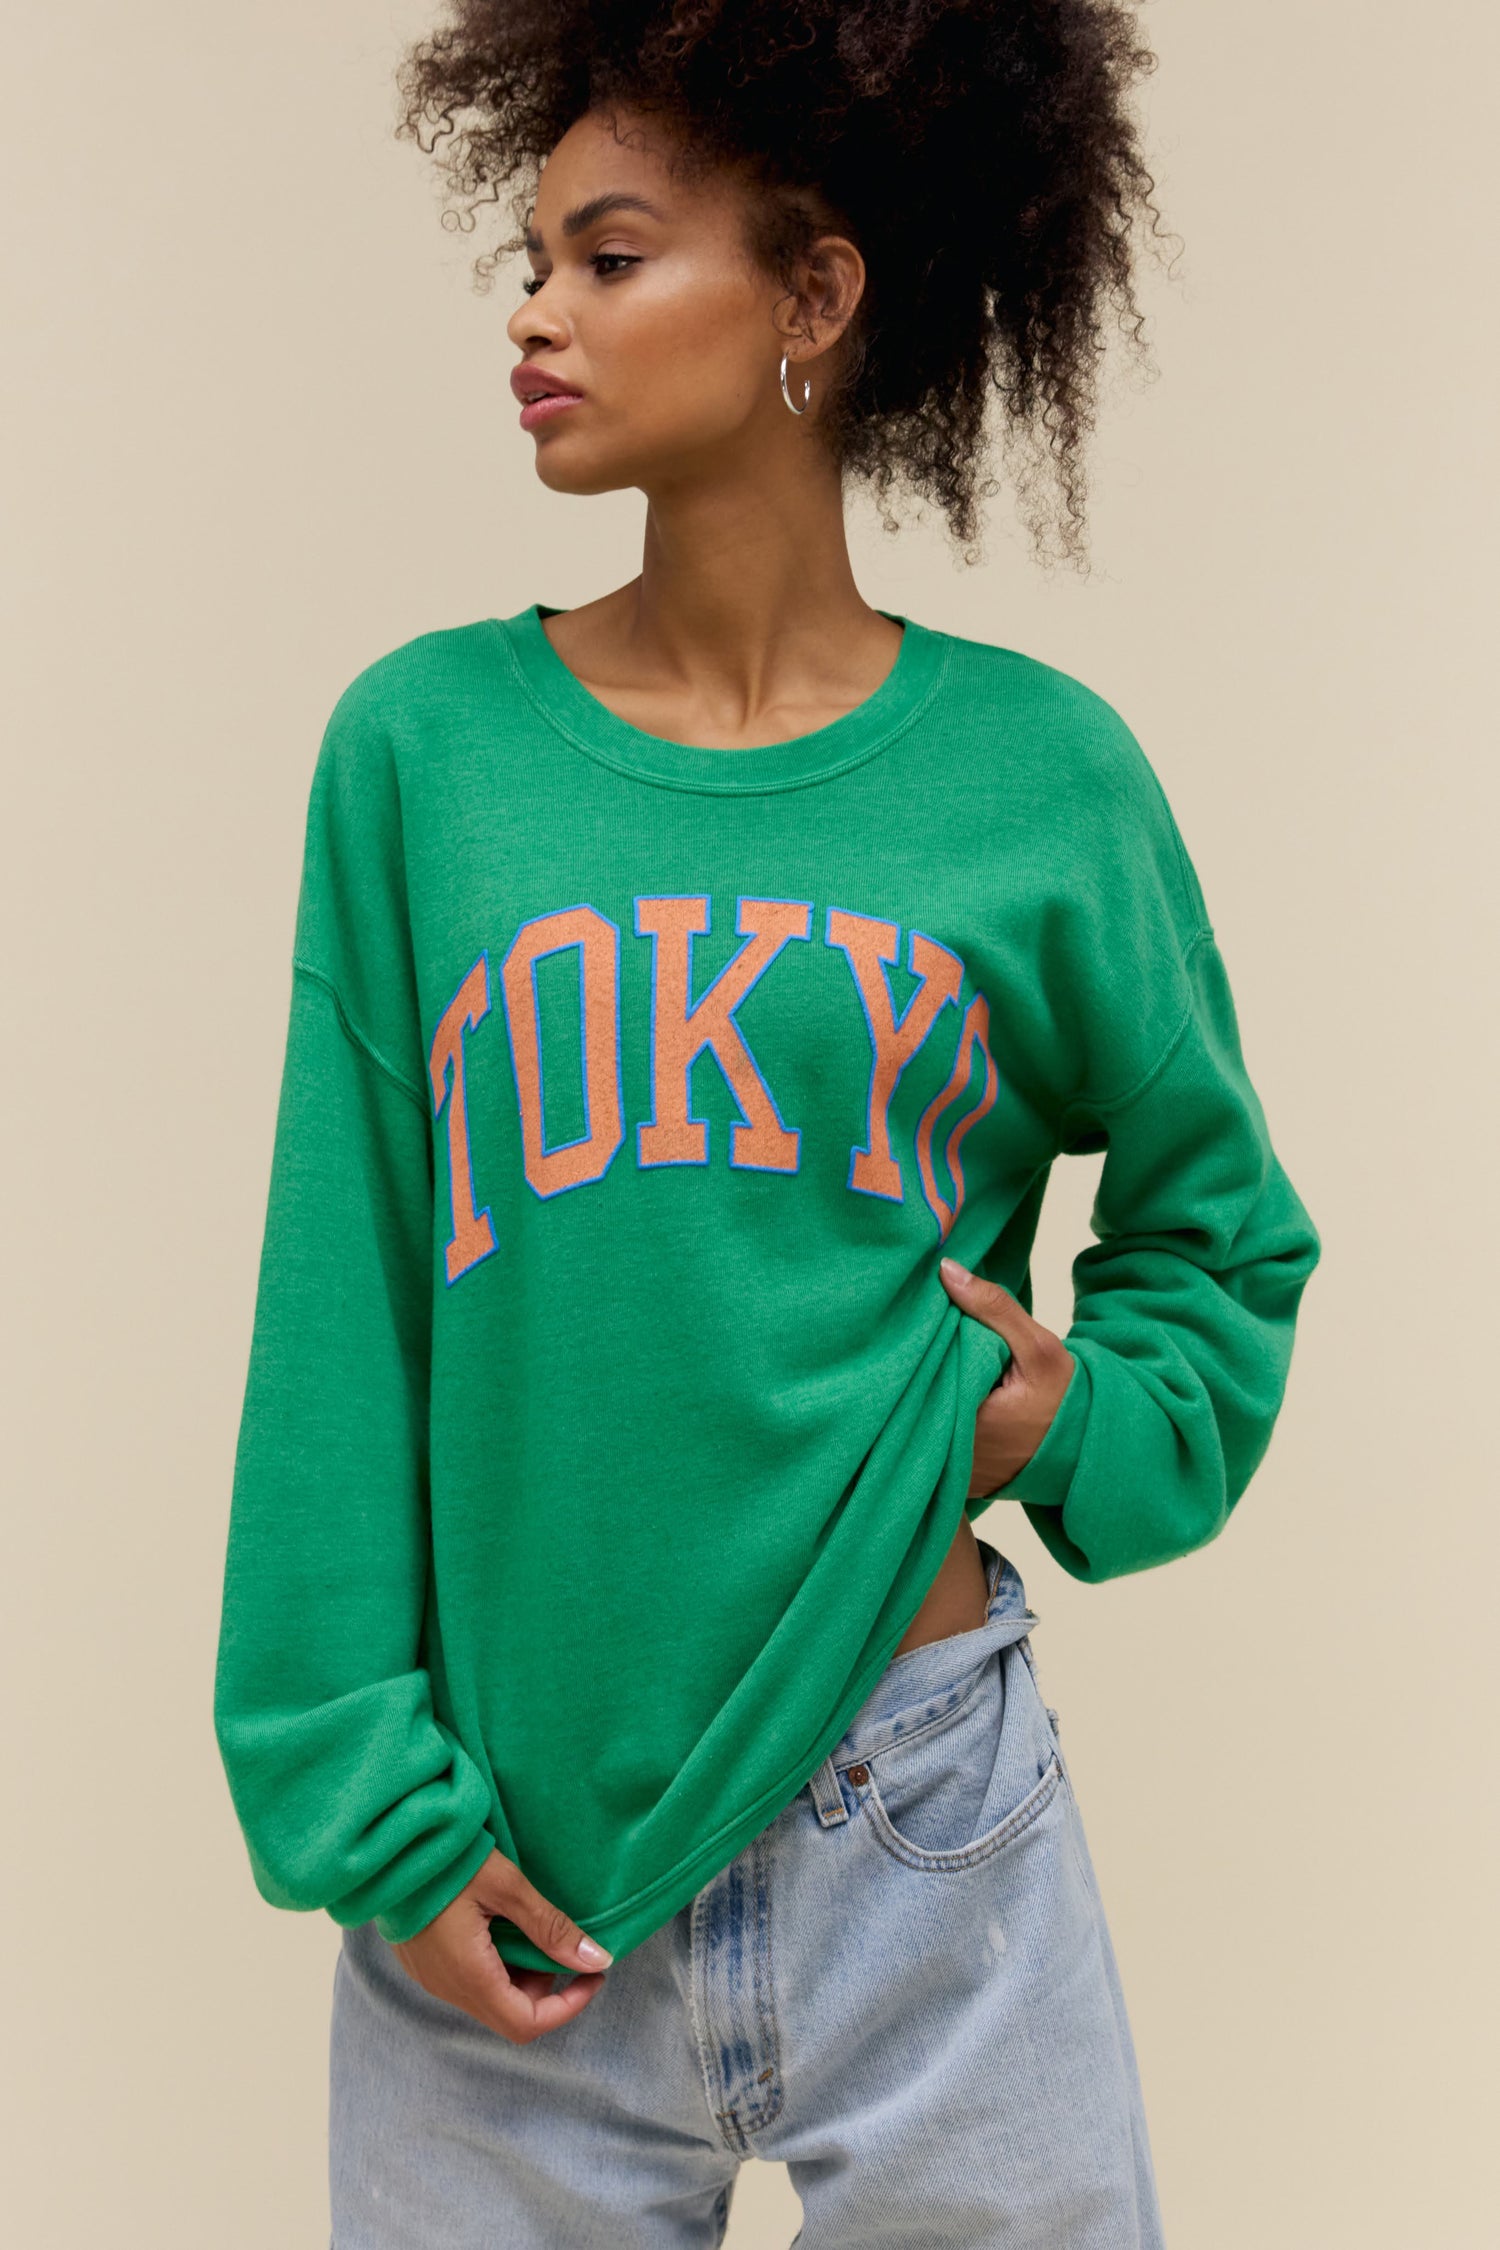 Curly-haired model wearing an oversized tri-blend fleece sweatshirt in green with contrast orange 'Tokyo' collegiate style lettering